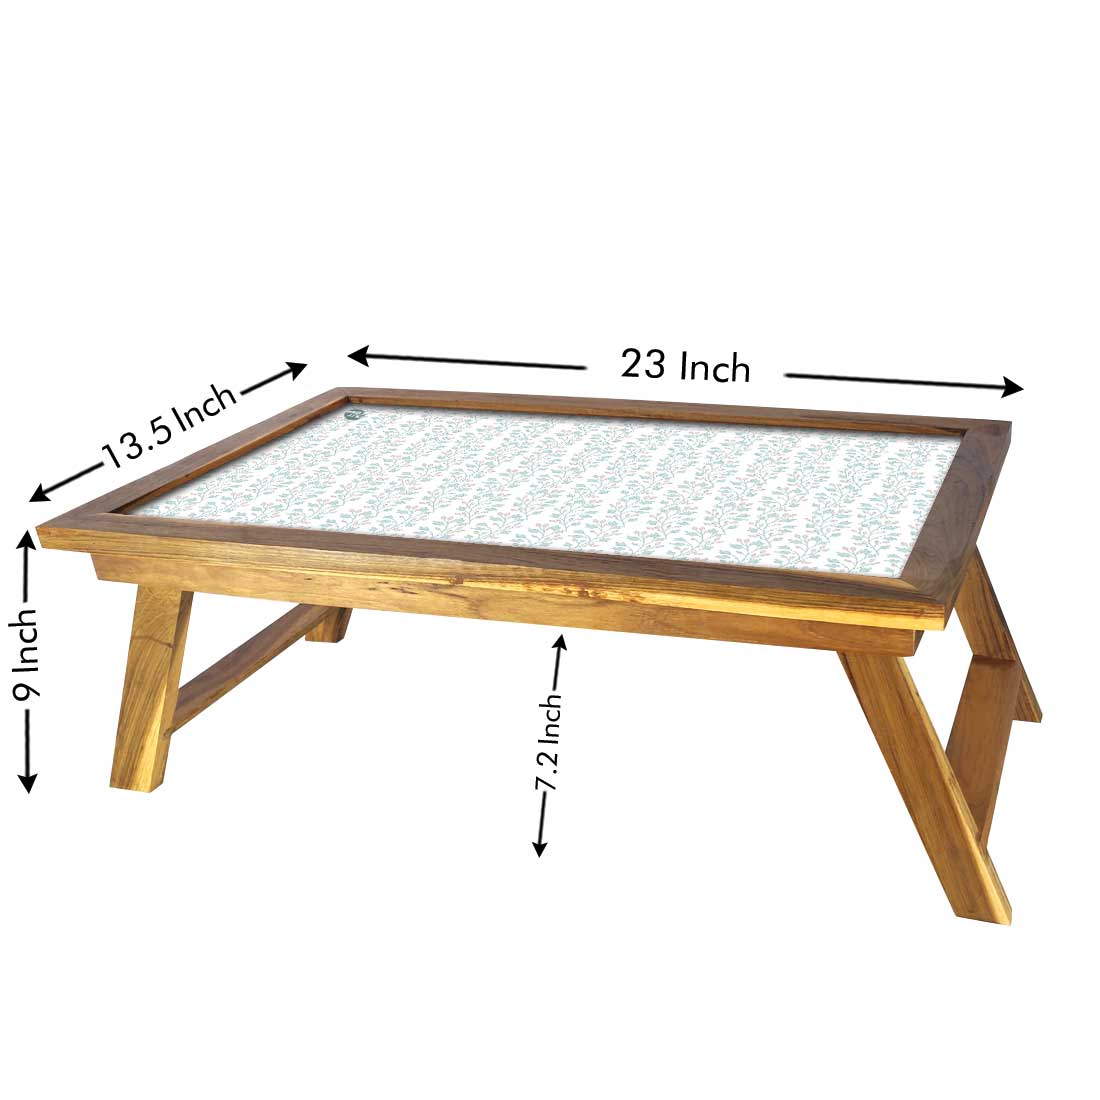 Folding Laptop Table for Home Bed Breakfast Tables Foldable Study Desk - Pattern Nutcase